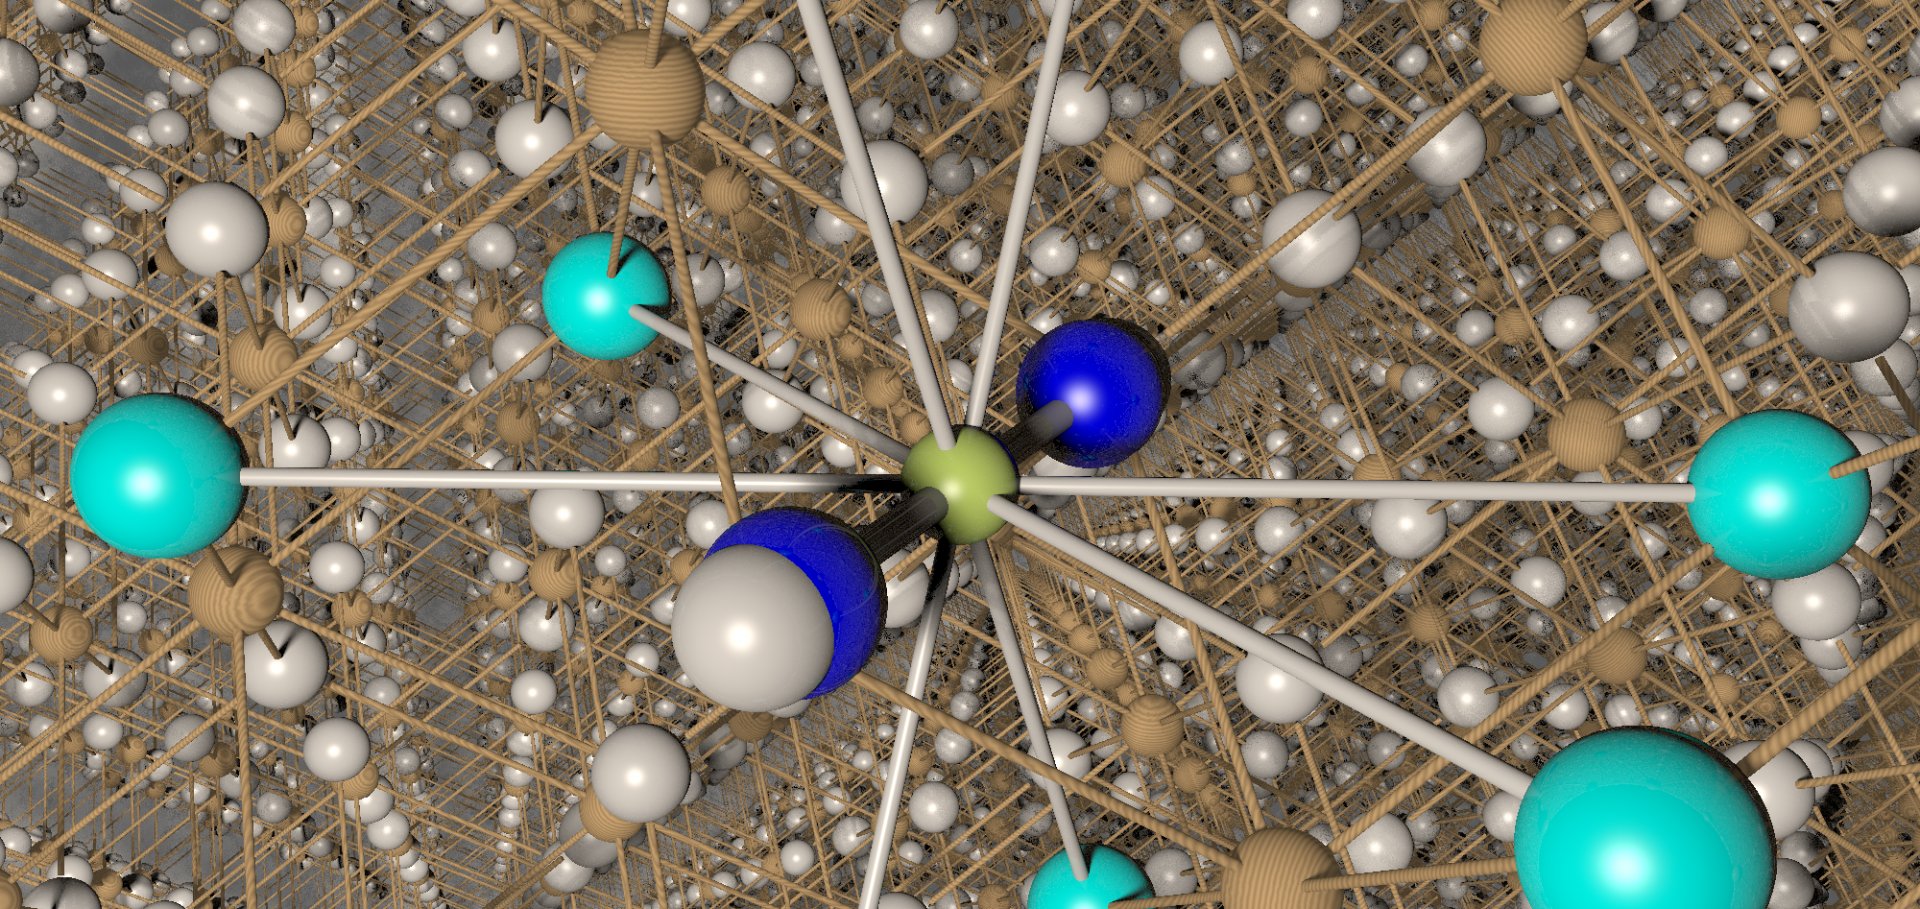 Crystal structure inside calcium fluoride with an implanted muon